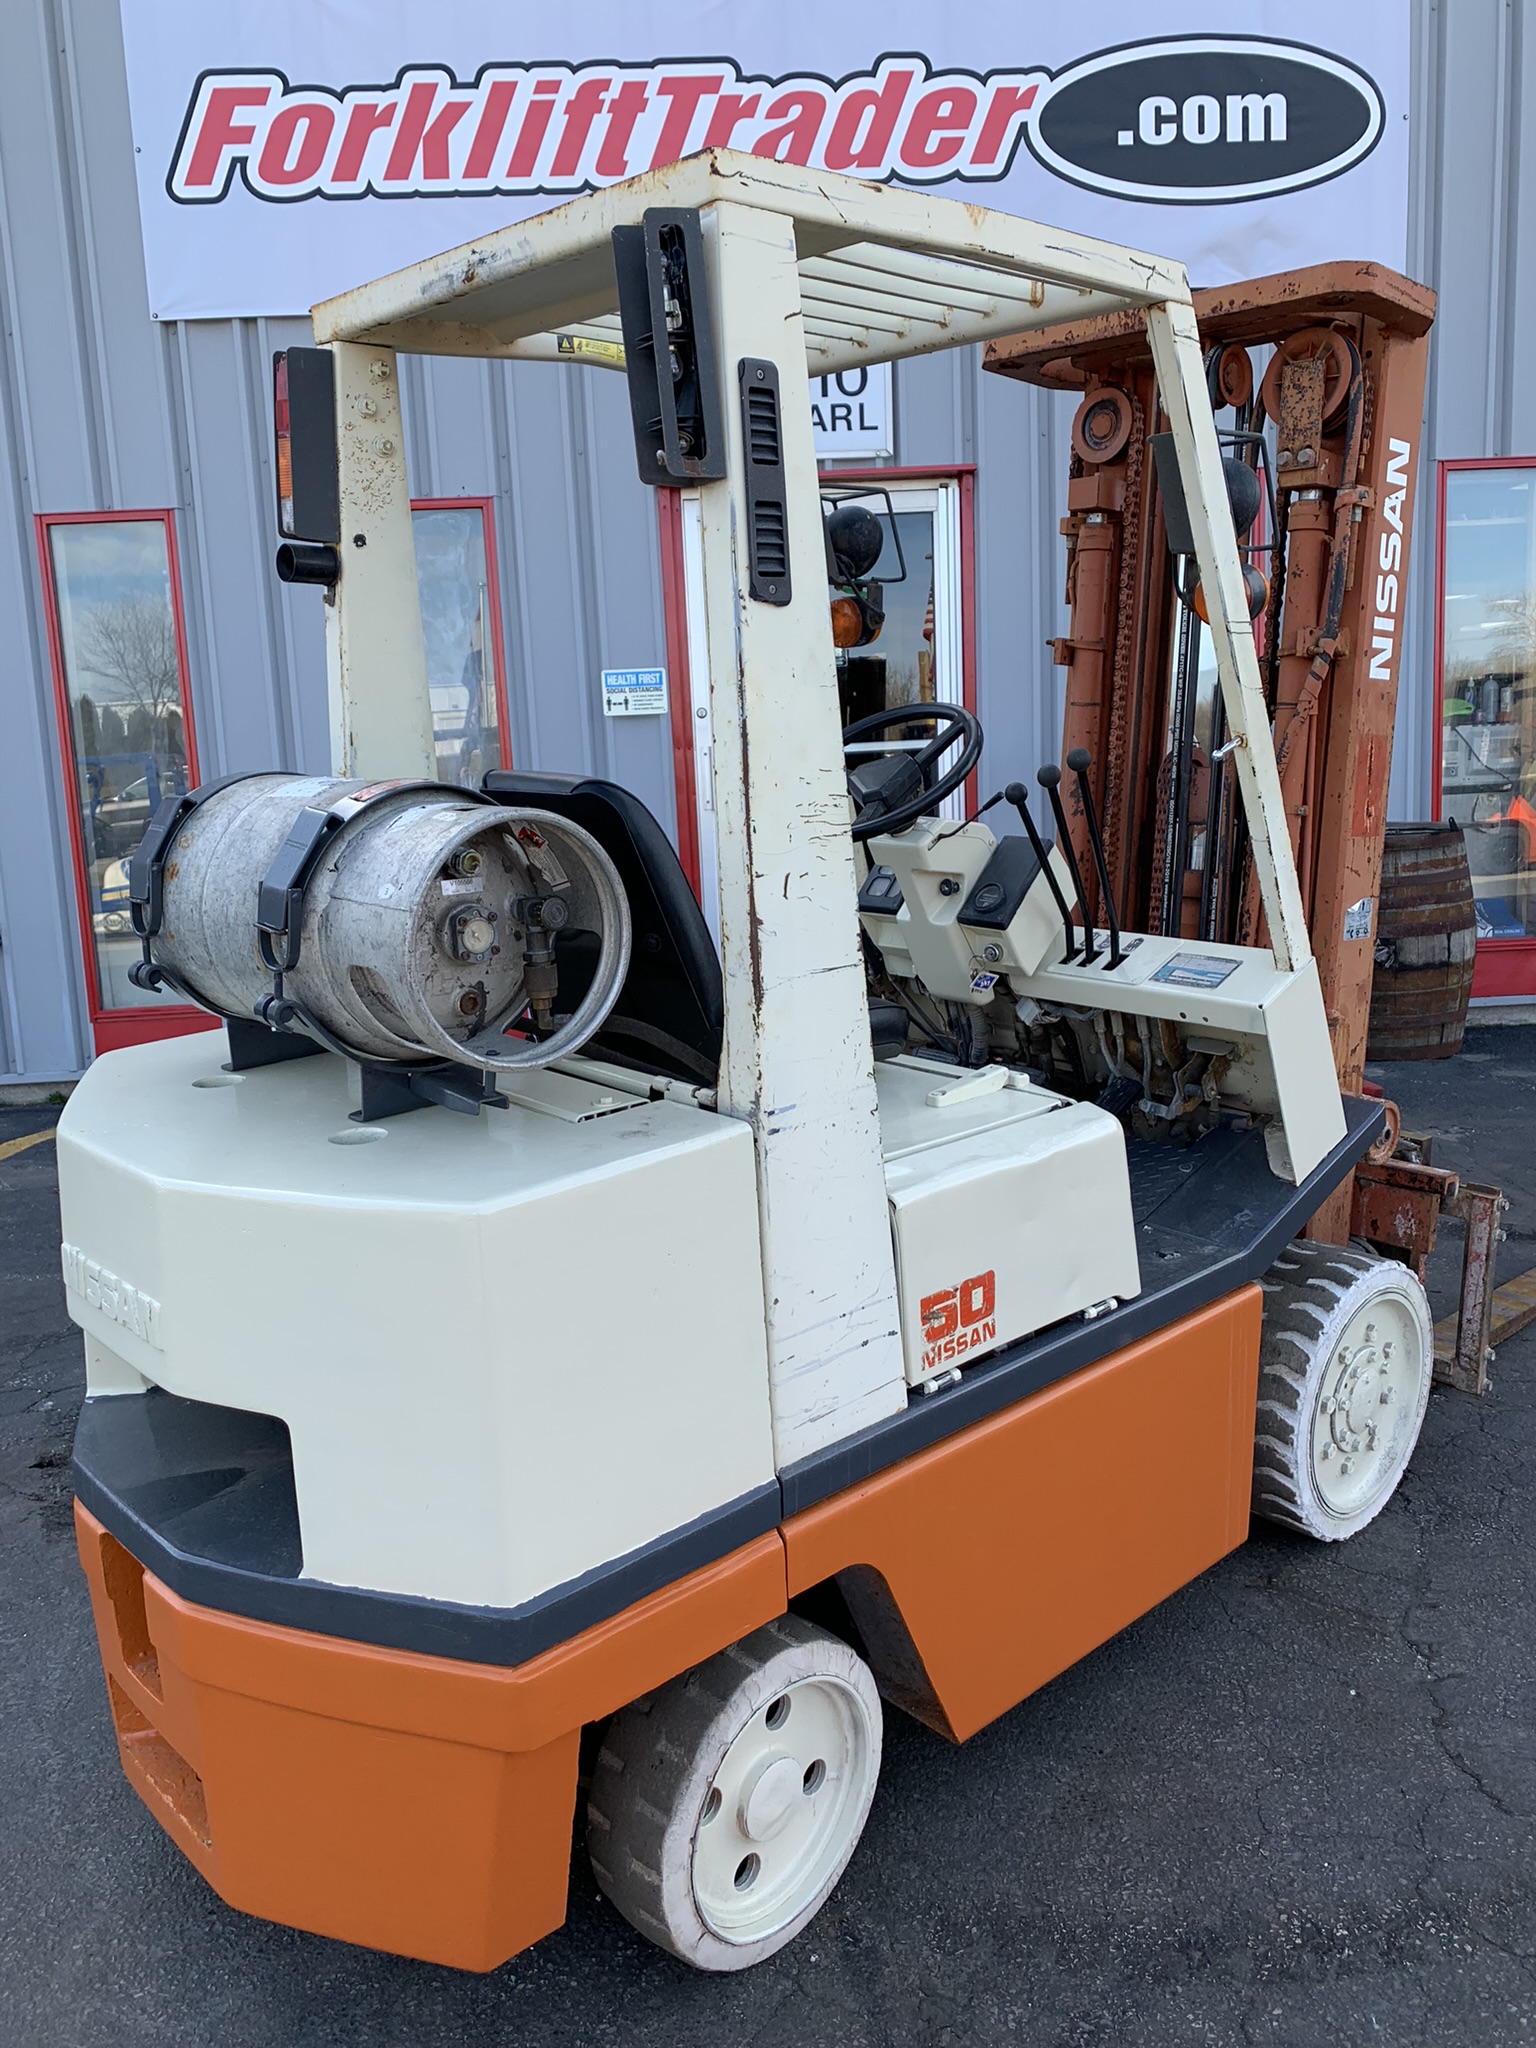 1997 nissan forklift with 5,000lb capacity for sale